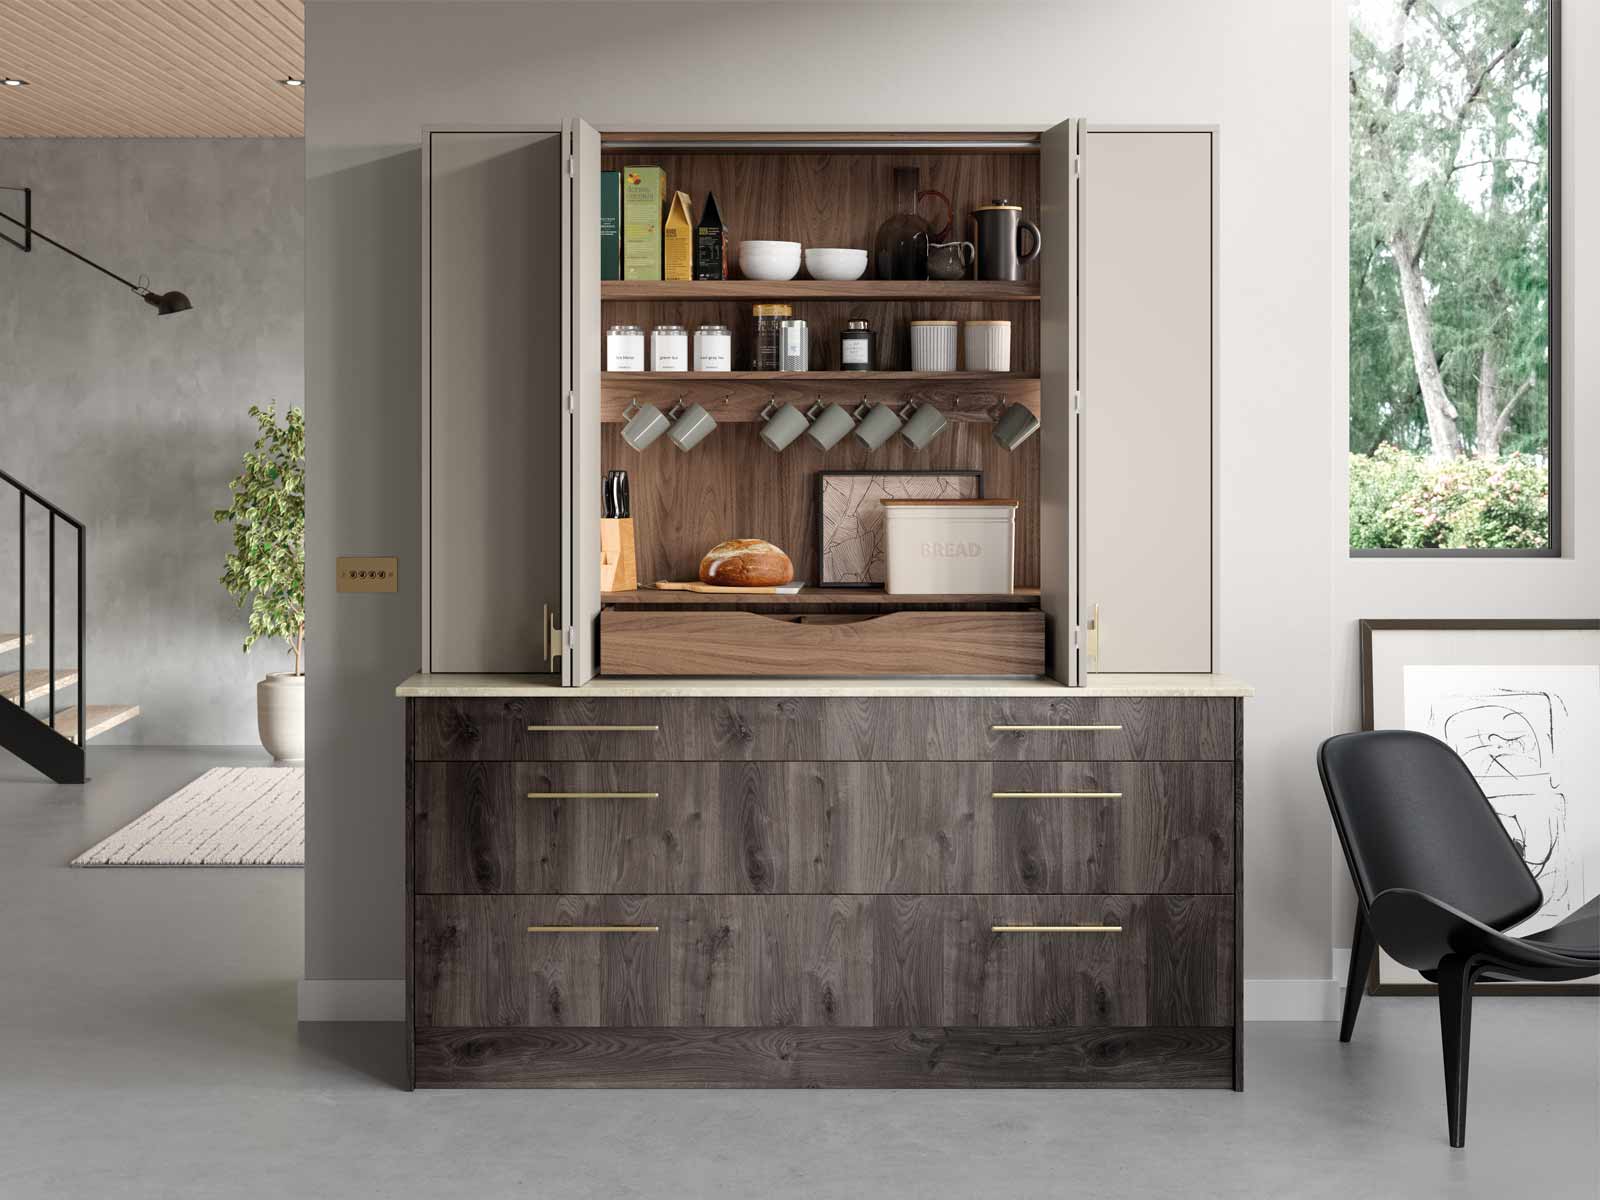 A luxury breakfast cupboard housing a tea station and coffee bar cabinet